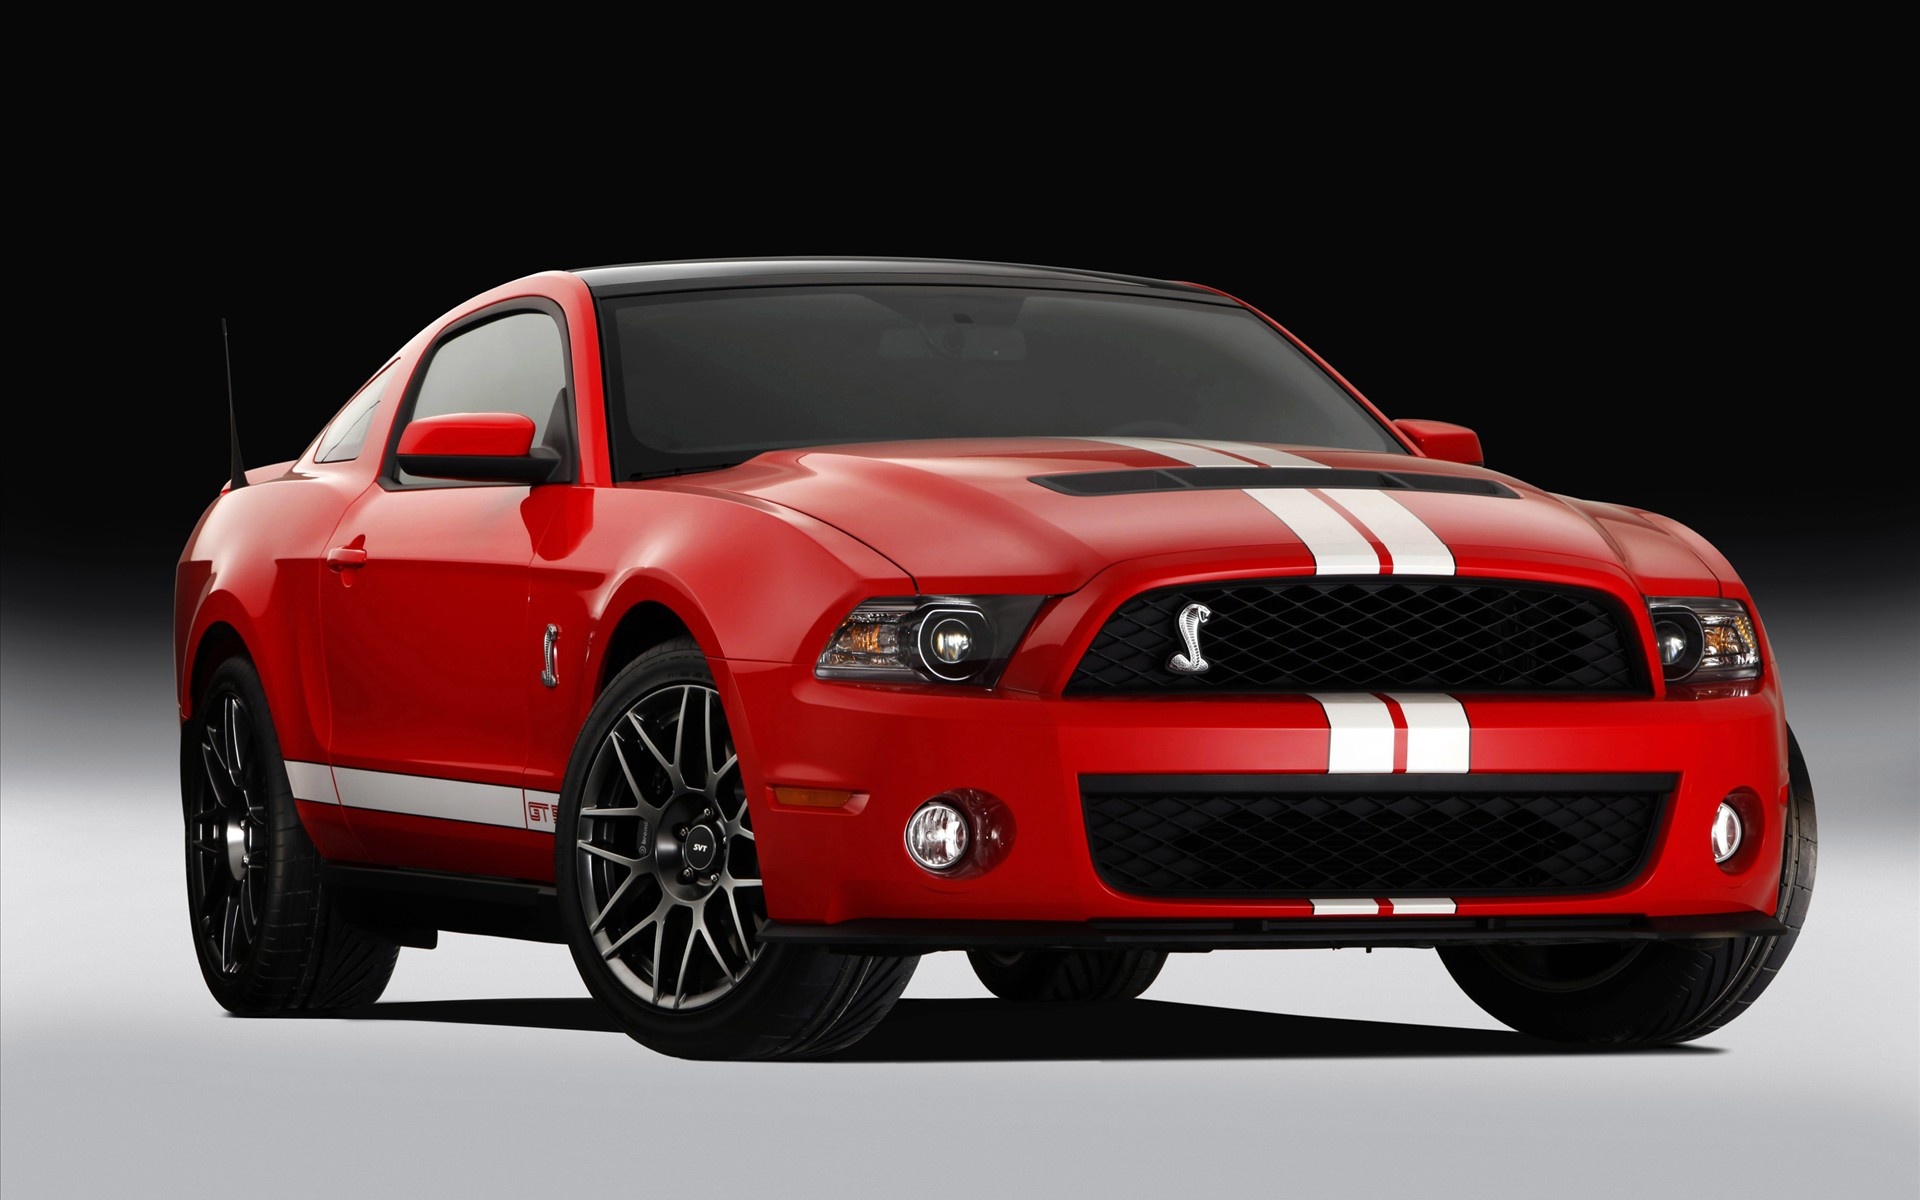 2011 Ford Shelby Gt500 4 Wallpapers In Jpg Format For Free Download